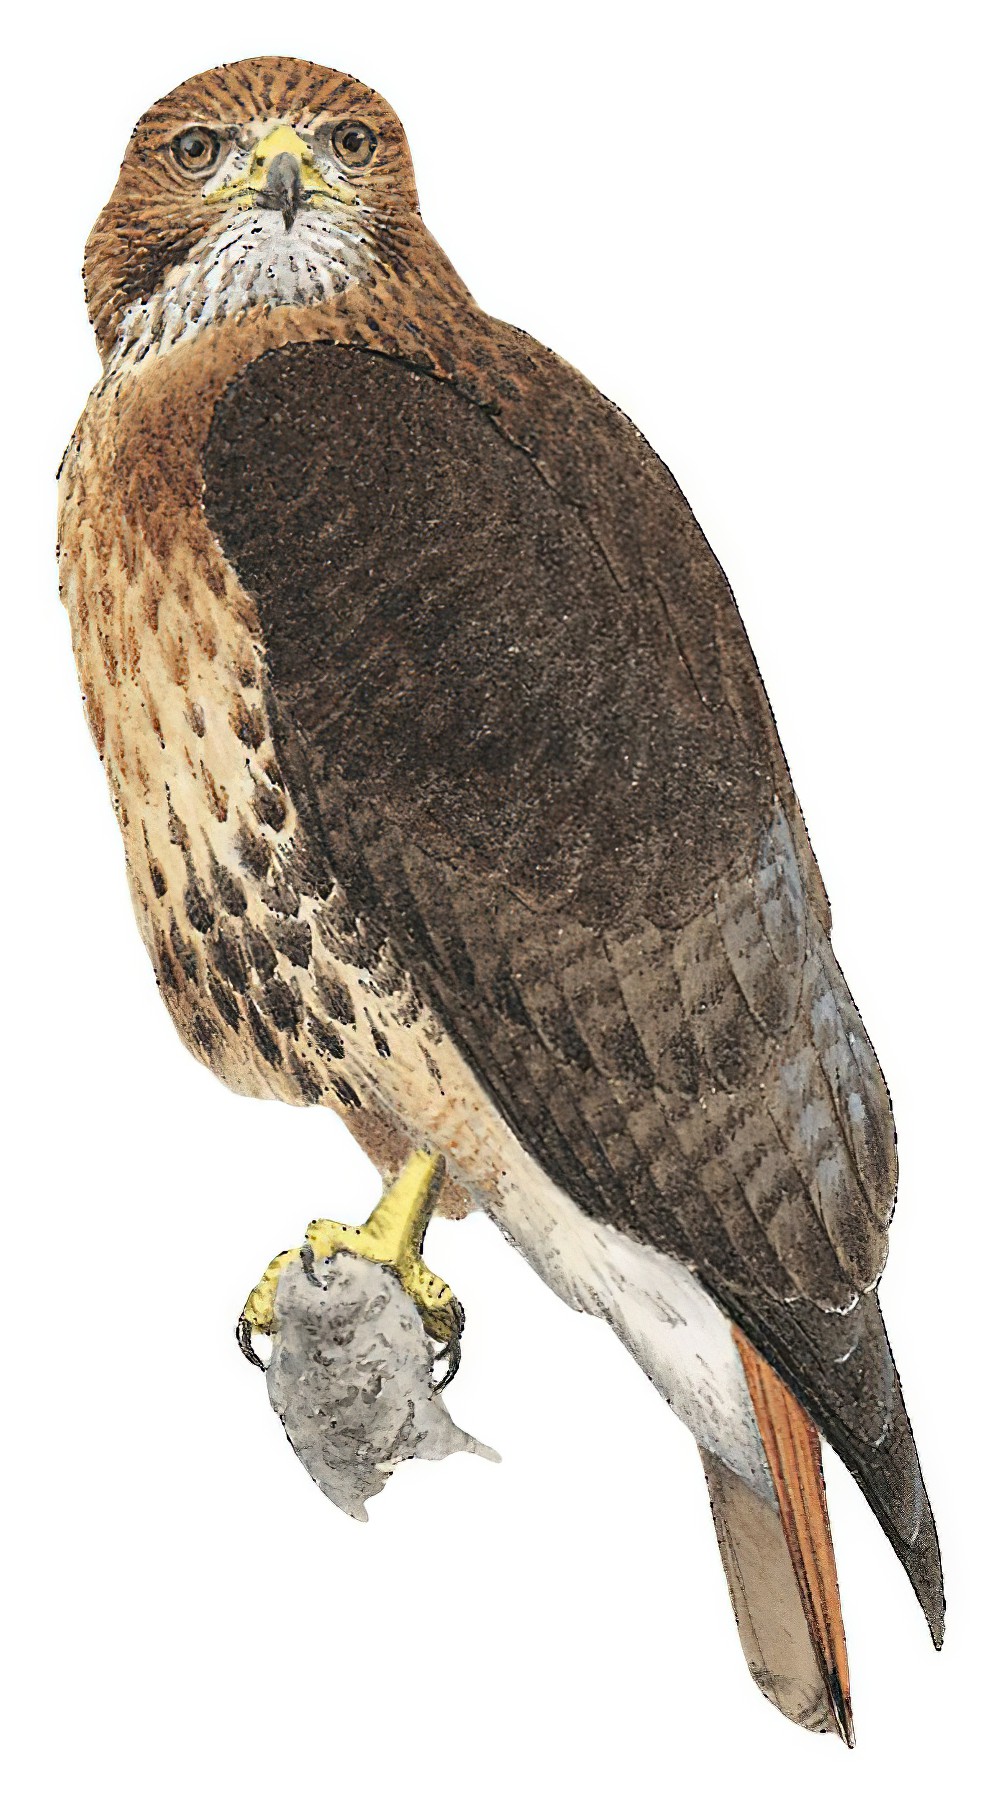 Red-tailed Hawk / Buteo jamaicensis